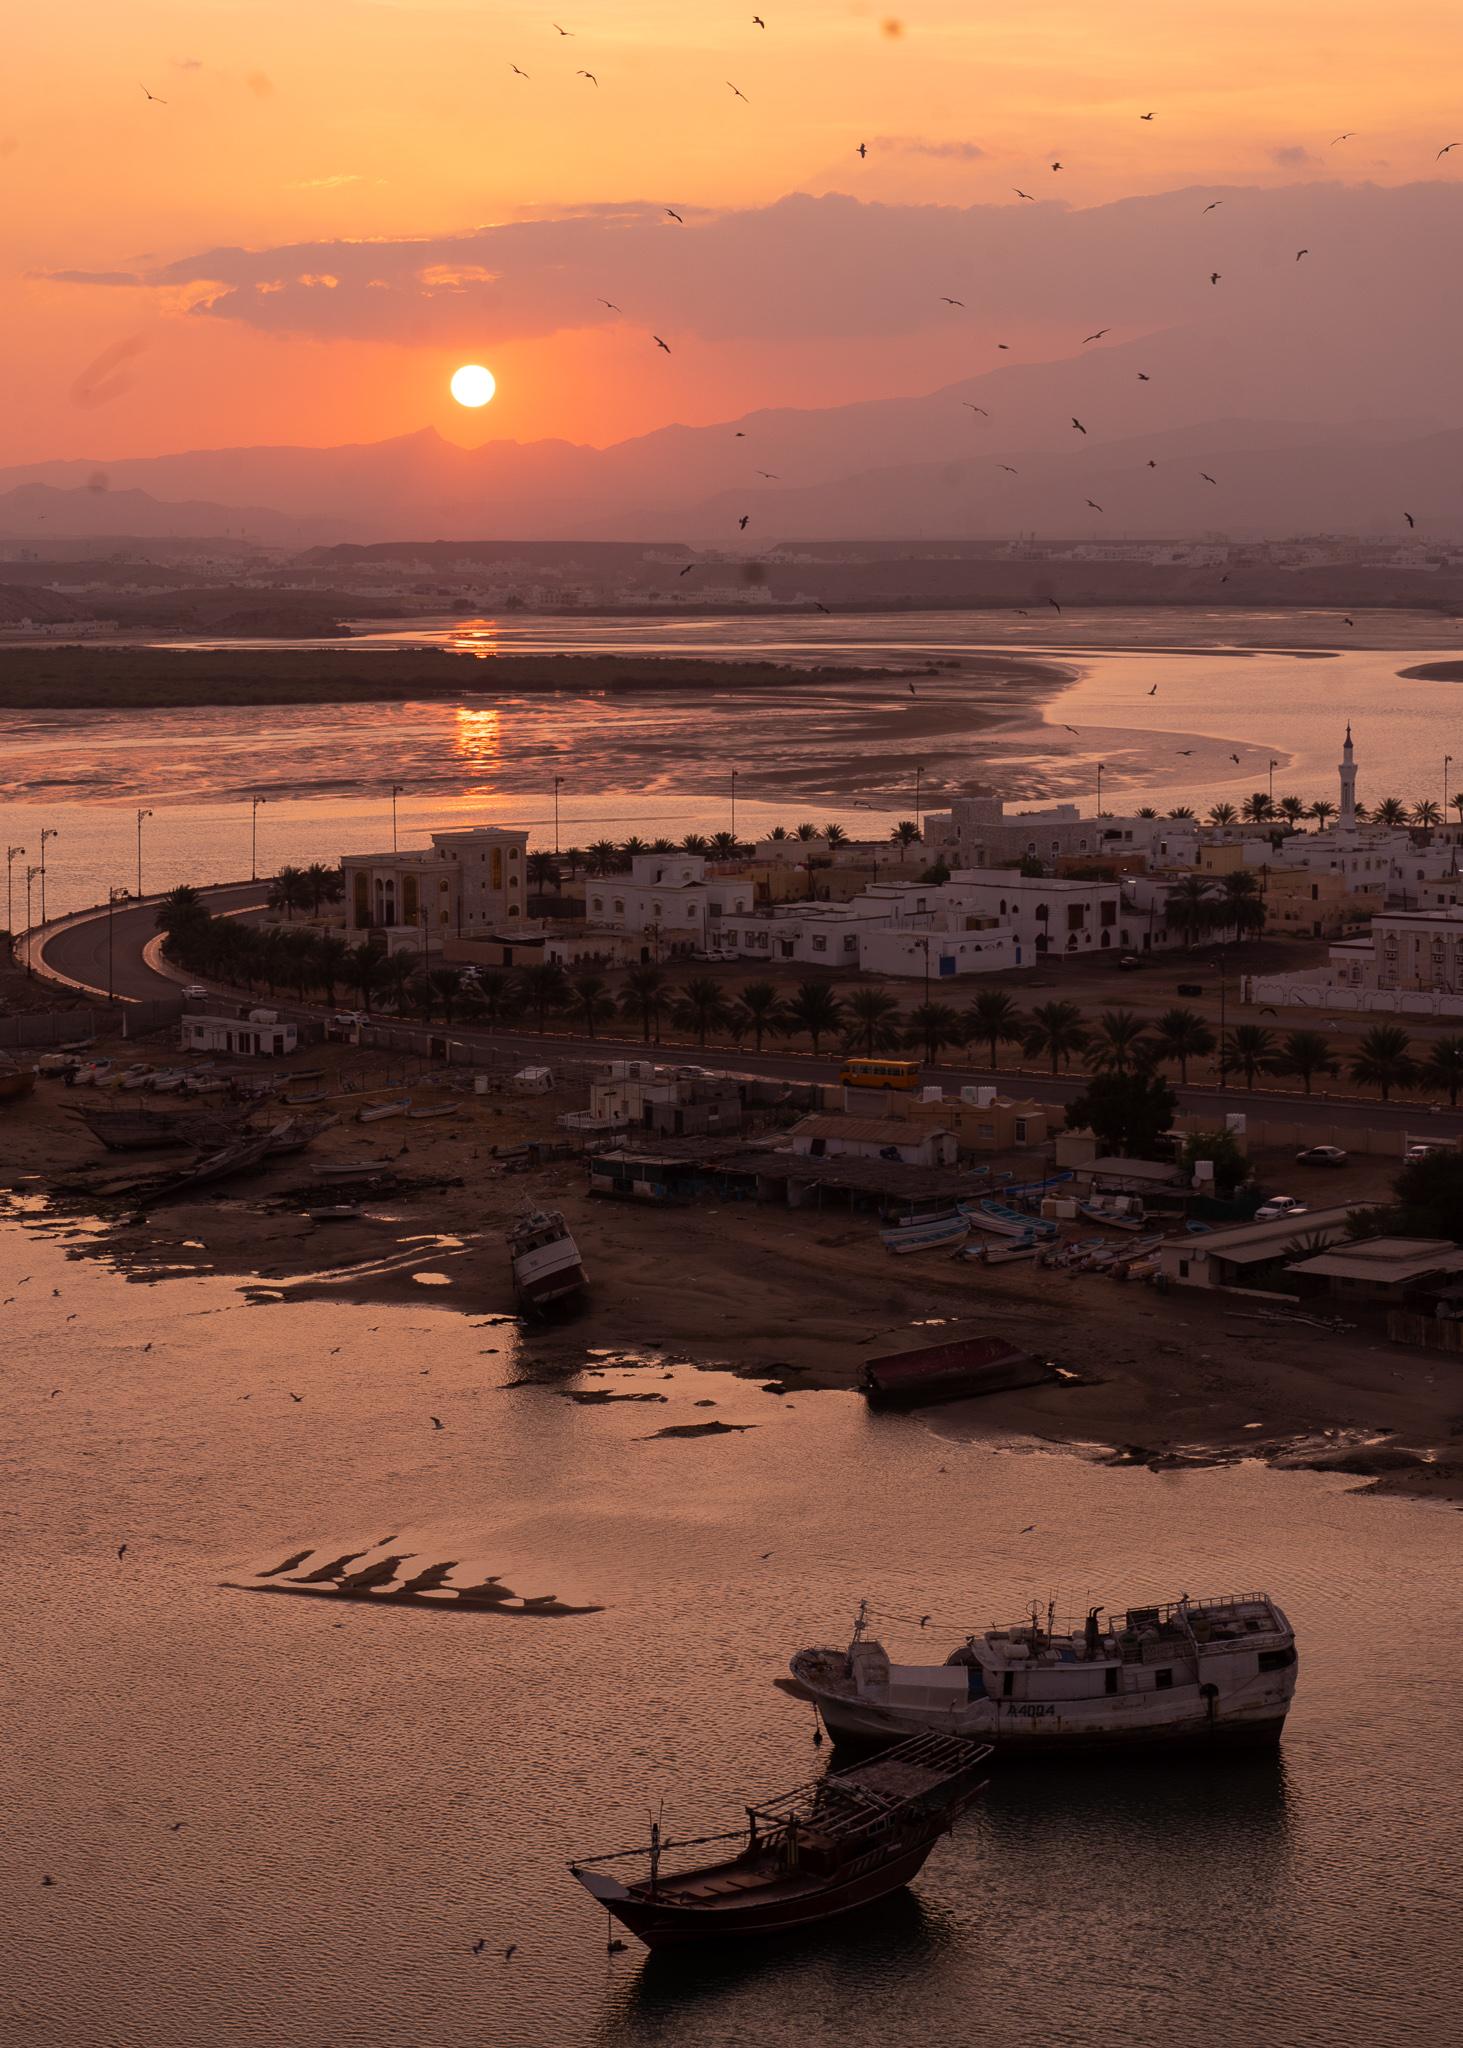 A view of a sun setting with many birds flying in the distance in Sur, Oman